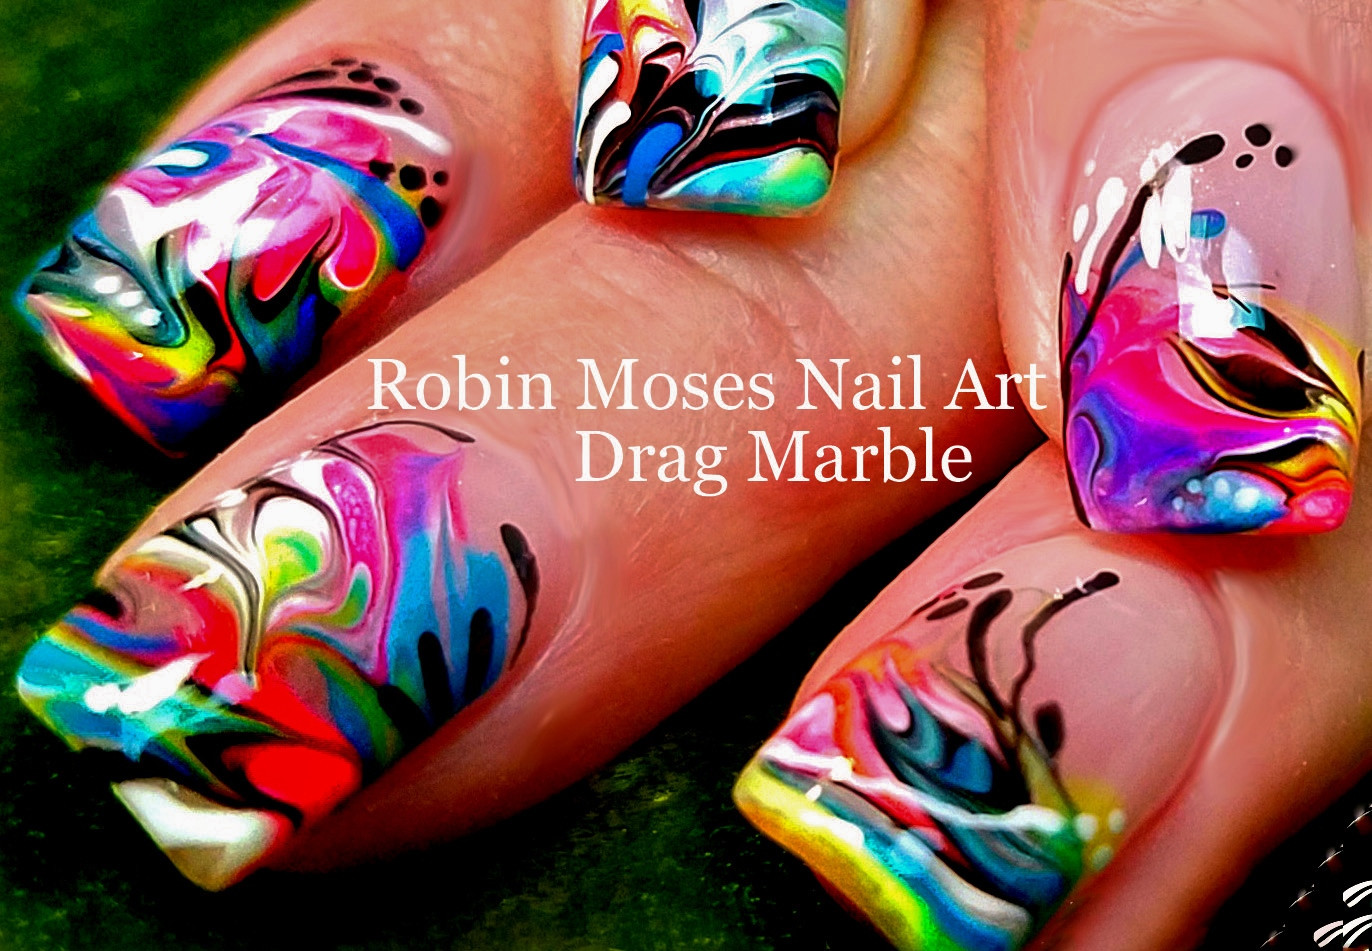 Robin Moses Nail Art Brushes for Sale on Amazon - wide 2